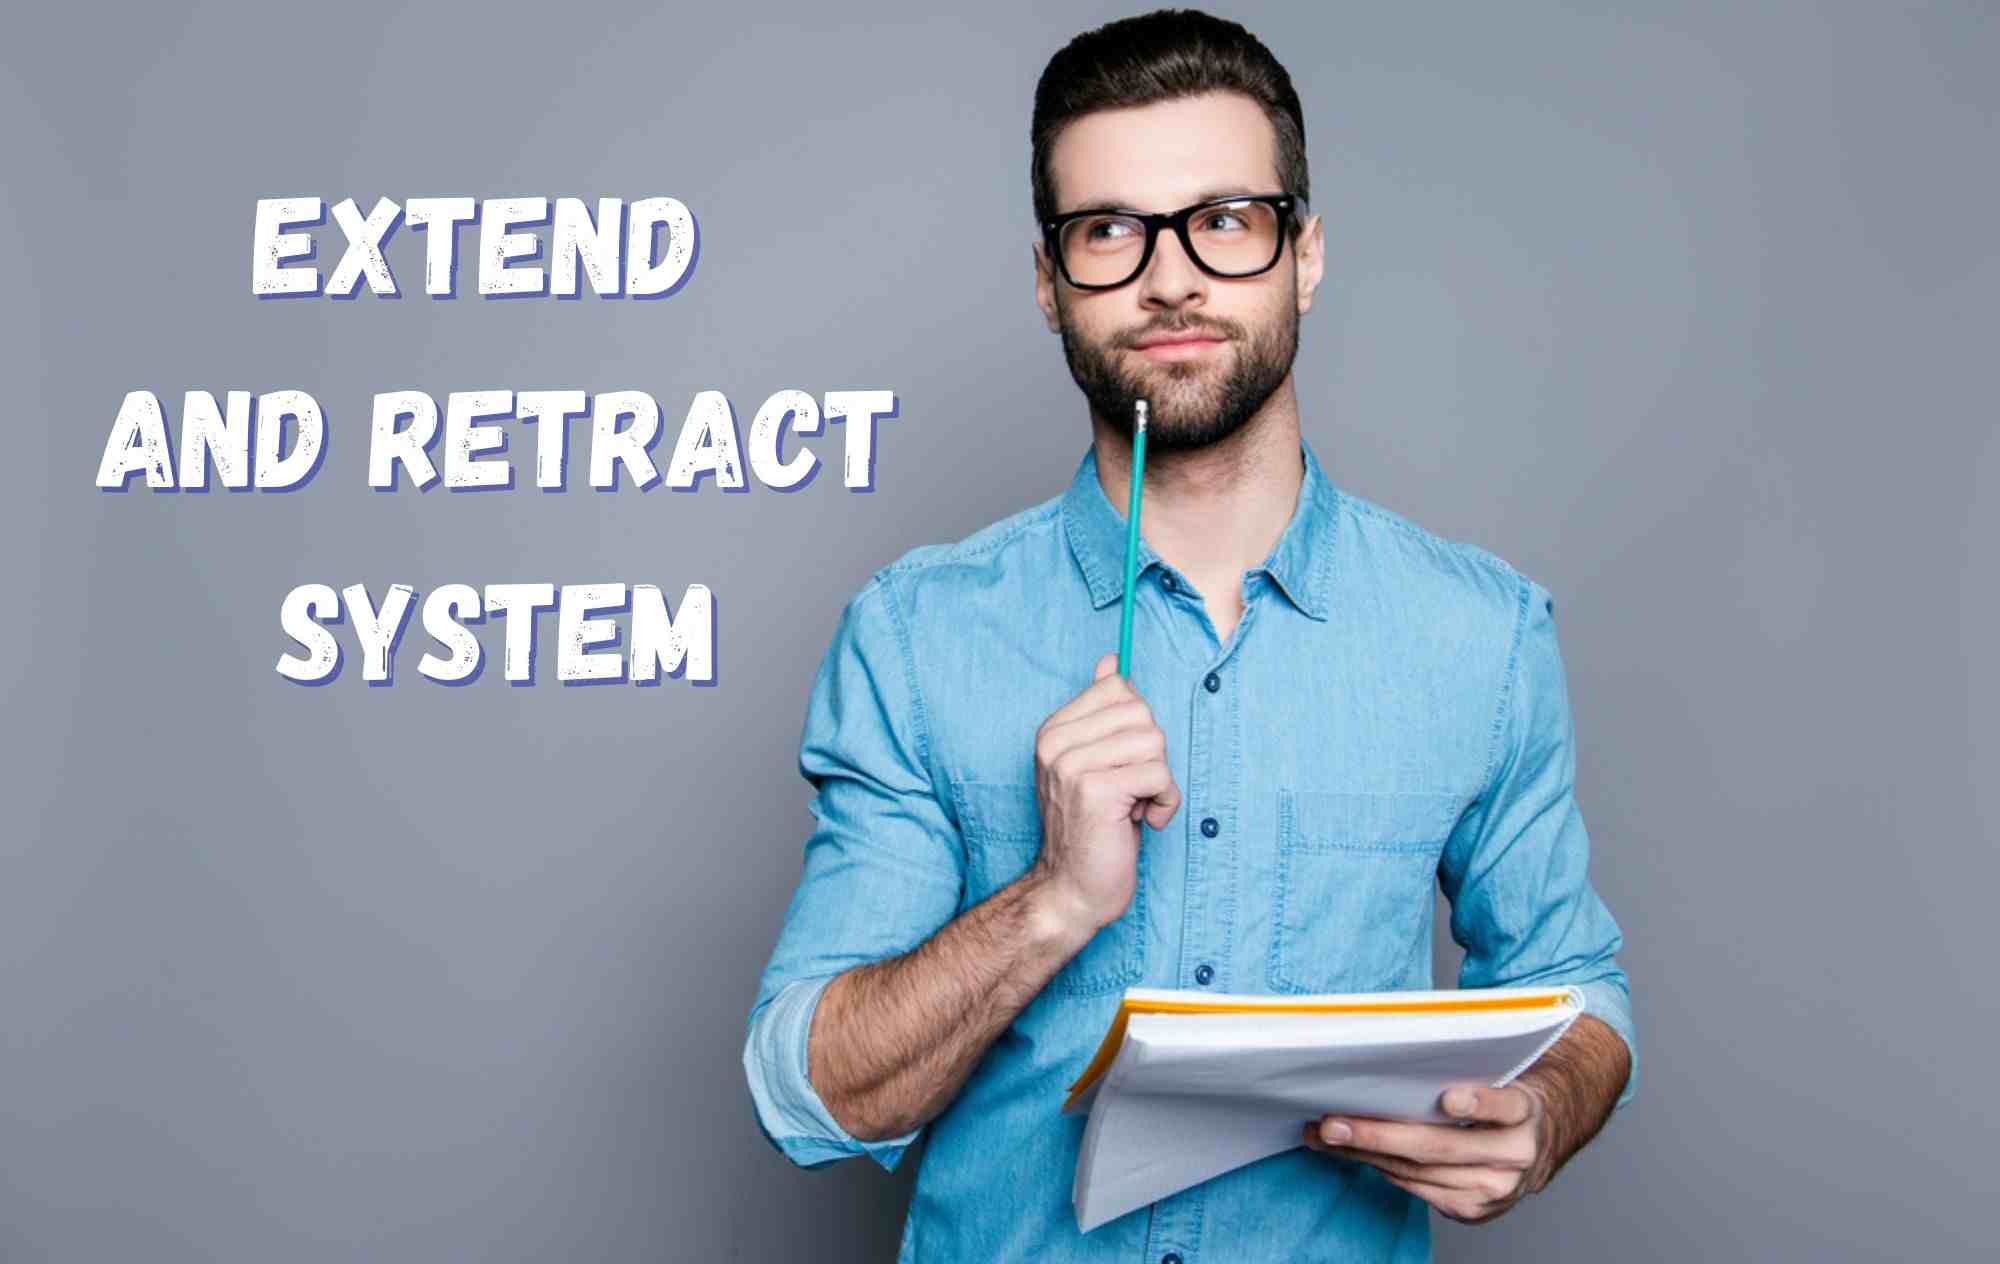 Extend and Retract System